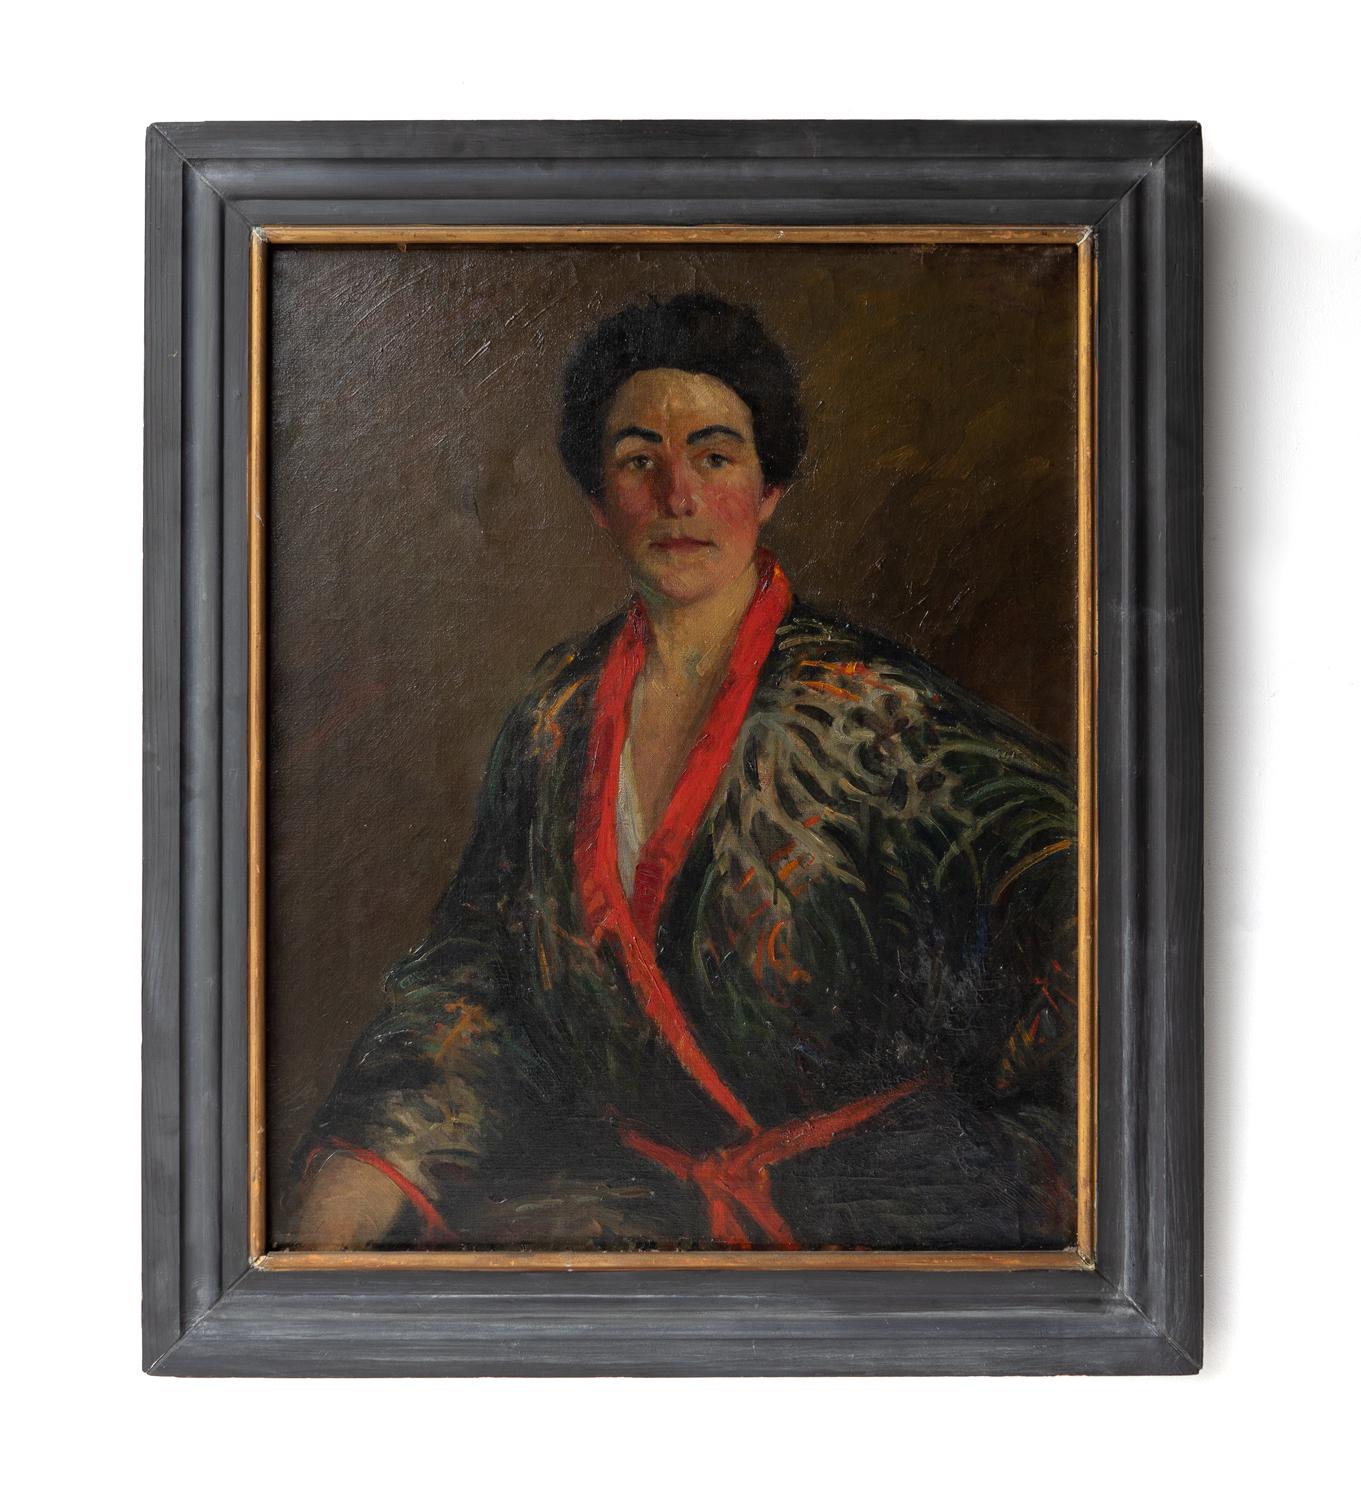 ANTIQUE ORIGINAL OIL ON CANVAS PAINTING DEPICTING A FEMALE SITTER, 1920s 
Depicting Ellen M. Farnum looking straight at the viewer dressed in the most wonderful red trimmed robe or kimono. 

Painted by a talented hand, expertly capturing the